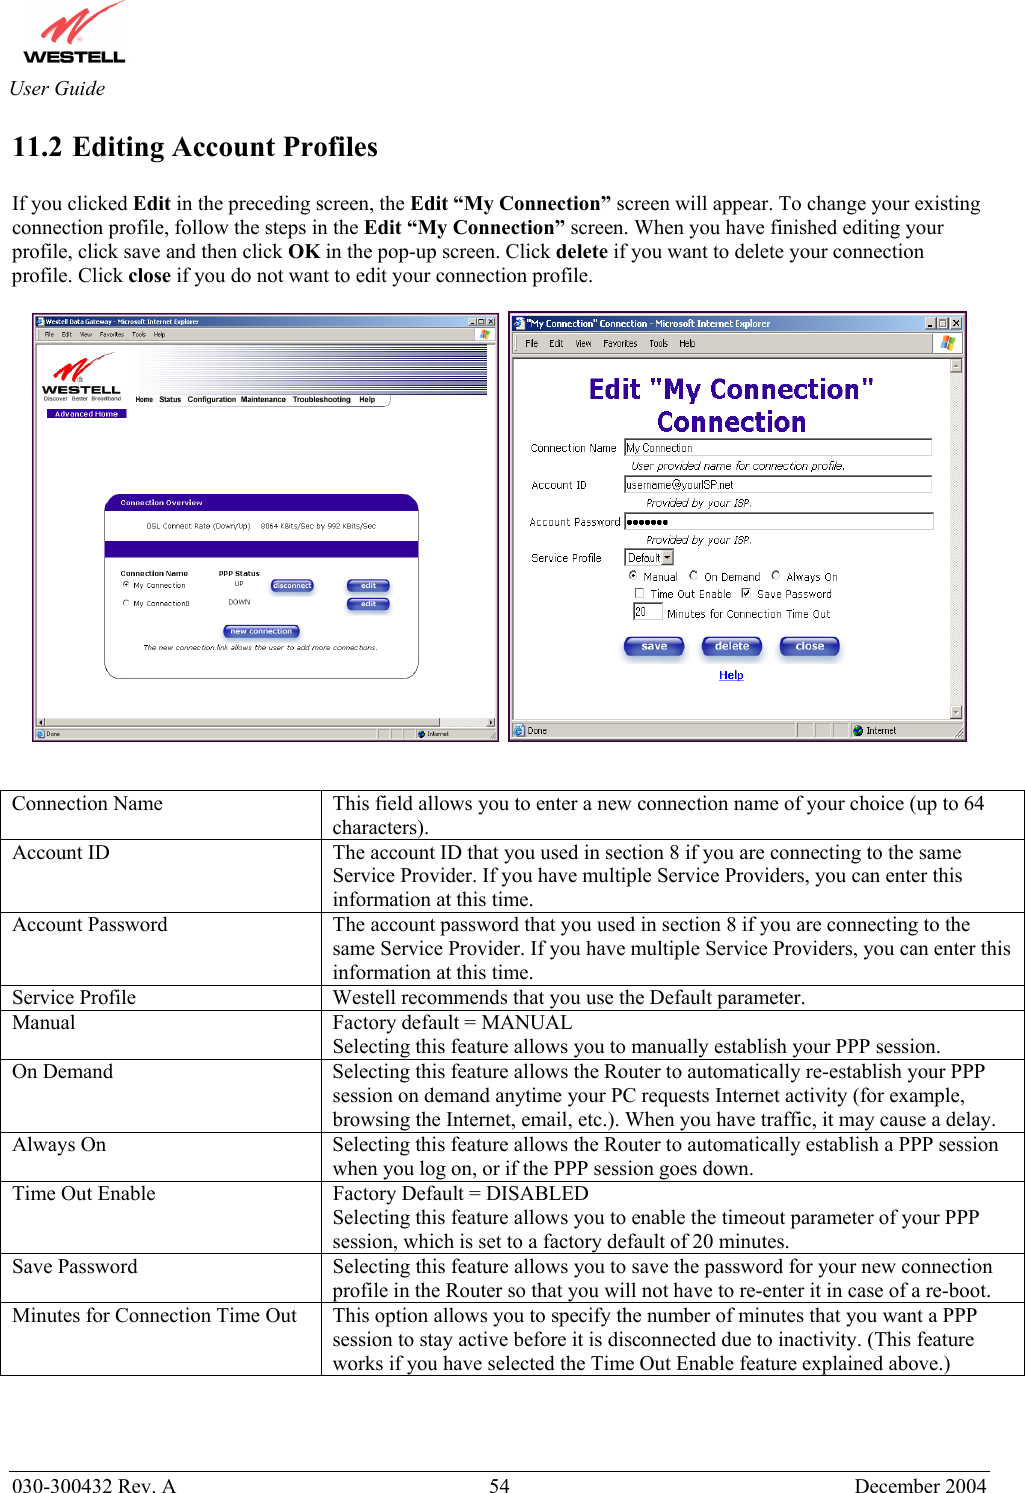       030-300432 Rev. A  54 December 2004  User Guide 11.2 Editing Account Profiles  If you clicked Edit in the preceding screen, the Edit “My Connection” screen will appear. To change your existing connection profile, follow the steps in the Edit “My Connection” screen. When you have finished editing your profile, click save and then click OK in the pop-up screen. Click delete if you want to delete your connection profile. Click close if you do not want to edit your connection profile.             Connection Name  This field allows you to enter a new connection name of your choice (up to 64 characters). Account ID  The account ID that you used in section 8 if you are connecting to the same Service Provider. If you have multiple Service Providers, you can enter this information at this time. Account Password  The account password that you used in section 8 if you are connecting to the same Service Provider. If you have multiple Service Providers, you can enter this information at this time. Service Profile  Westell recommends that you use the Default parameter. Manual  Factory default = MANUAL Selecting this feature allows you to manually establish your PPP session. On Demand  Selecting this feature allows the Router to automatically re-establish your PPP session on demand anytime your PC requests Internet activity (for example, browsing the Internet, email, etc.). When you have traffic, it may cause a delay. Always On  Selecting this feature allows the Router to automatically establish a PPP session when you log on, or if the PPP session goes down. Time Out Enable  Factory Default = DISABLED Selecting this feature allows you to enable the timeout parameter of your PPP session, which is set to a factory default of 20 minutes. Save Password  Selecting this feature allows you to save the password for your new connection profile in the Router so that you will not have to re-enter it in case of a re-boot. Minutes for Connection Time Out  This option allows you to specify the number of minutes that you want a PPP session to stay active before it is disconnected due to inactivity. (This feature works if you have selected the Time Out Enable feature explained above.)   